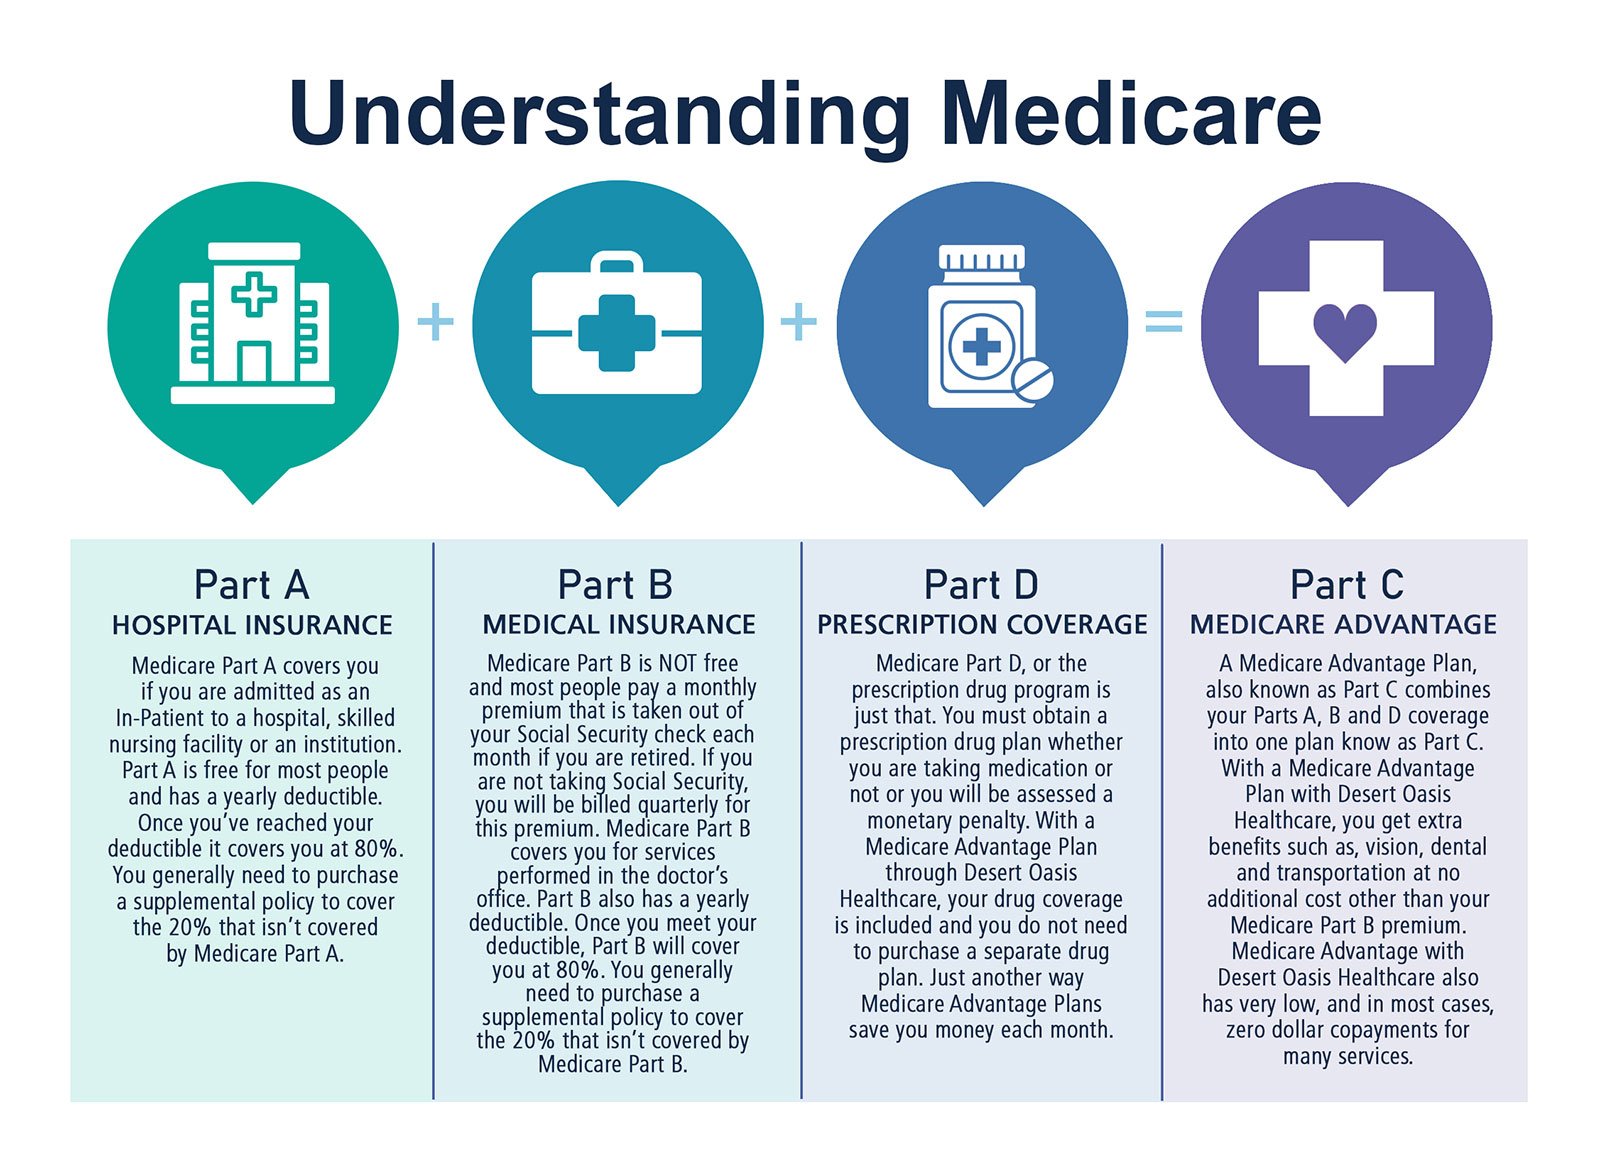 medicare is divided into parts abcd